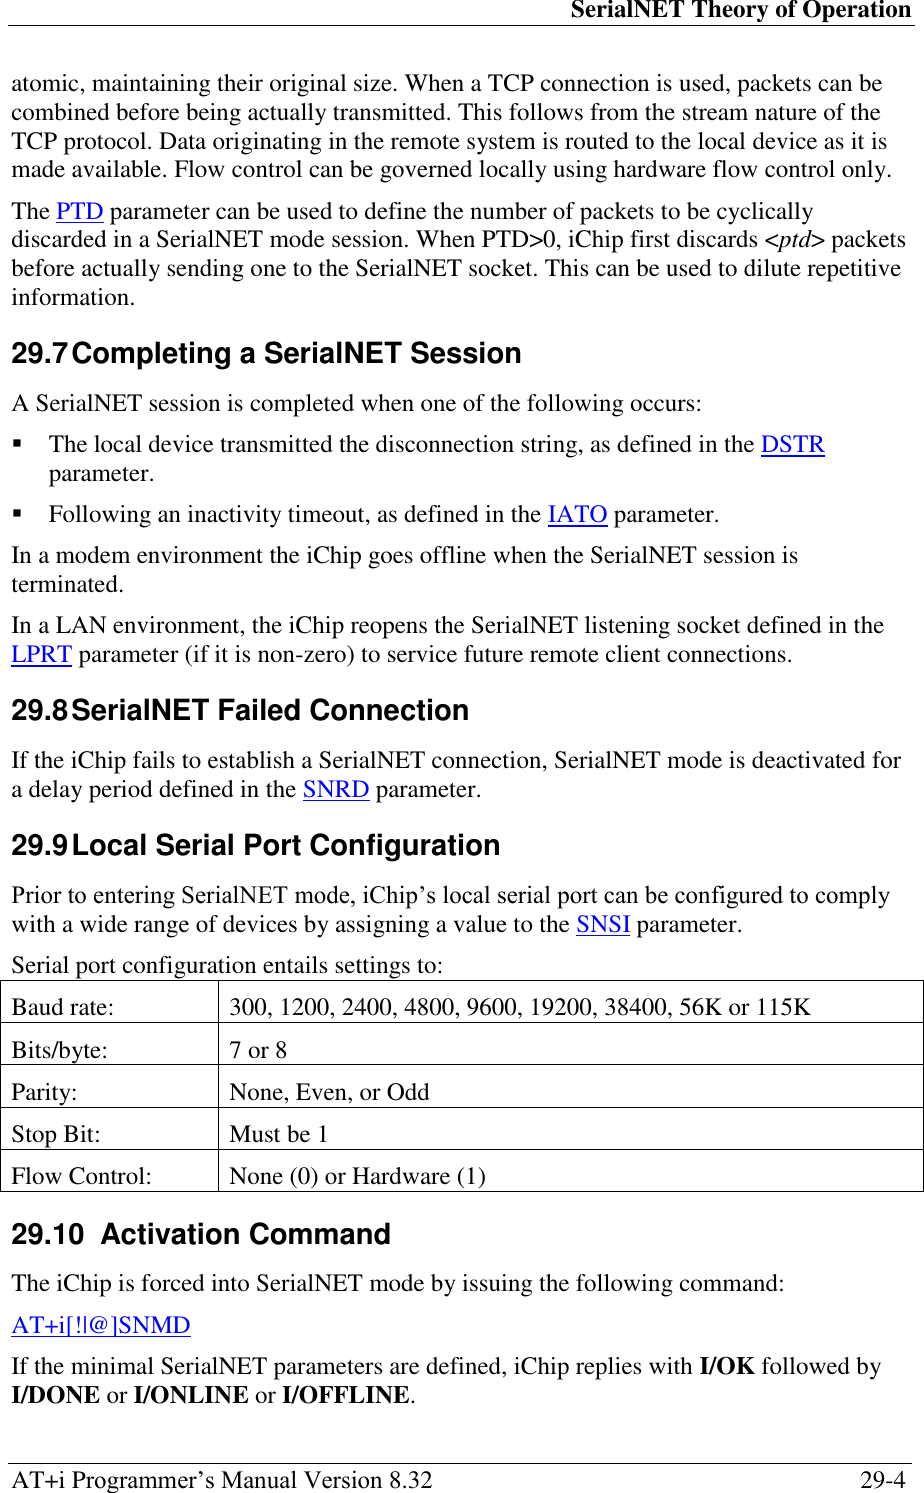 SerialNET Theory of Operation AT+i Programmer‘s Manual Version 8.32  29-4 atomic, maintaining their original size. When a TCP connection is used, packets can be combined before being actually transmitted. This follows from the stream nature of the TCP protocol. Data originating in the remote system is routed to the local device as it is made available. Flow control can be governed locally using hardware flow control only. The PTD parameter can be used to define the number of packets to be cyclically discarded in a SerialNET mode session. When PTD&gt;0, iChip first discards &lt;ptd&gt; packets before actually sending one to the SerialNET socket. This can be used to dilute repetitive information. 29.7 Completing a SerialNET Session A SerialNET session is completed when one of the following occurs:  The local device transmitted the disconnection string, as defined in the DSTR parameter.  Following an inactivity timeout, as defined in the IATO parameter. In a modem environment the iChip goes offline when the SerialNET session is terminated. In a LAN environment, the iChip reopens the SerialNET listening socket defined in the LPRT parameter (if it is non-zero) to service future remote client connections. 29.8 SerialNET Failed Connection If the iChip fails to establish a SerialNET connection, SerialNET mode is deactivated for a delay period defined in the SNRD parameter. 29.9 Local Serial Port Configuration Prior to entering SerialNET mode, iChip‘s local serial port can be configured to comply with a wide range of devices by assigning a value to the SNSI parameter. Serial port configuration entails settings to: Baud rate: 300, 1200, 2400, 4800, 9600, 19200, 38400, 56K or 115K Bits/byte: 7 or 8 Parity: None, Even, or Odd Stop Bit: Must be 1 Flow Control: None (0) or Hardware (1) 29.10  Activation Command The iChip is forced into SerialNET mode by issuing the following command: AT+i[!|@]SNMD If the minimal SerialNET parameters are defined, iChip replies with I/OK followed by I/DONE or I/ONLINE or I/OFFLINE. 